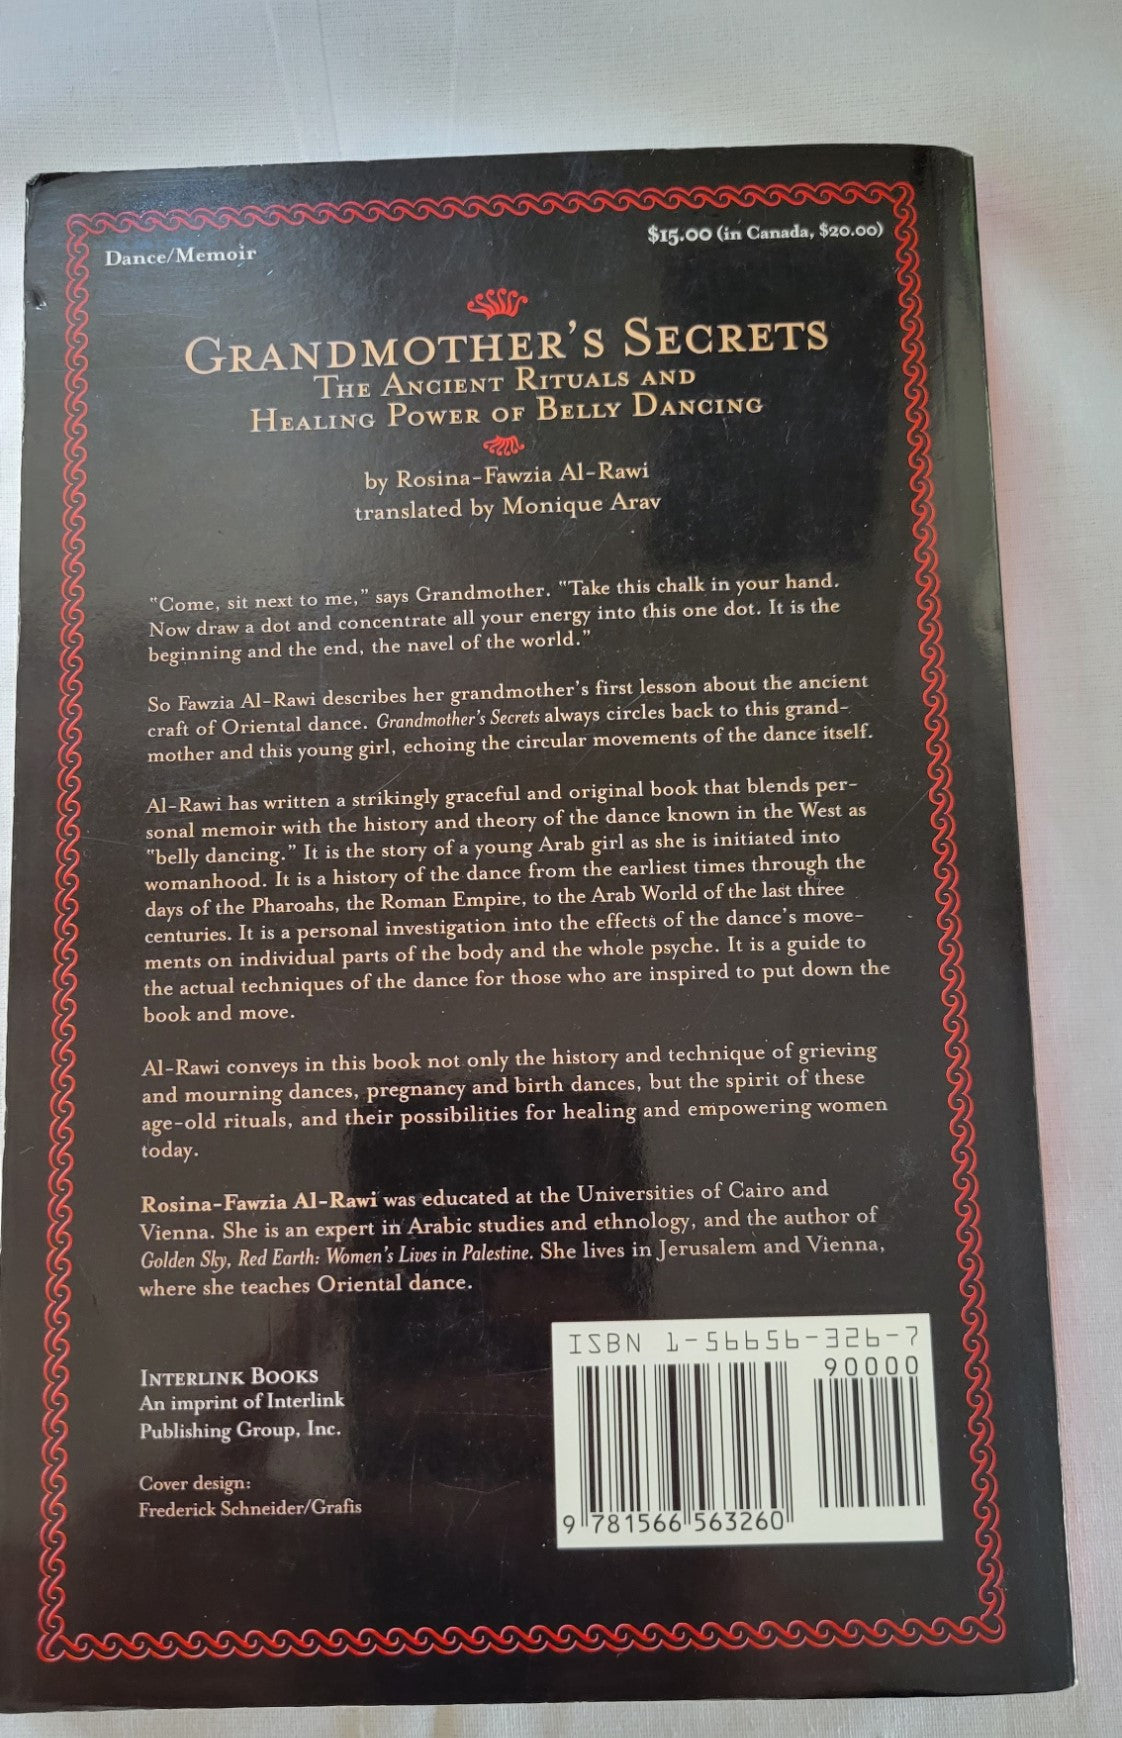 Used book for sale “Grandmother's Secrets: The Ancient Rituals and Healing Power of Belly Dancing” written by Rosina-Fawzia Al-Rawi, translated by Monique Arav.  View of back cover.